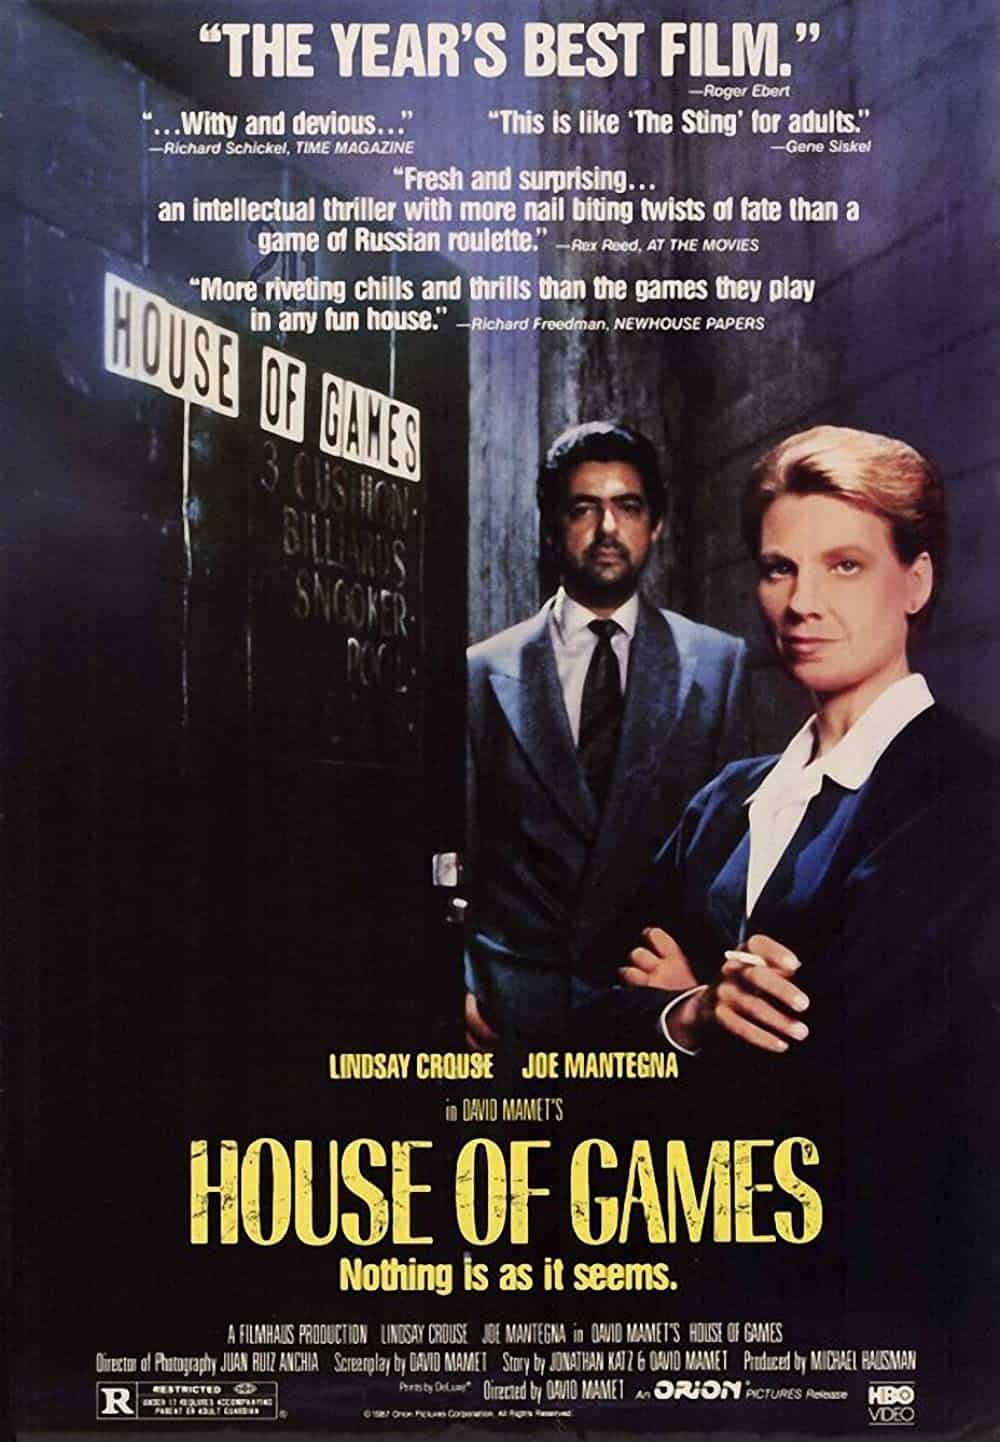 House of Games (1987) 15 Best Con Movies to Add in Your Watchlist